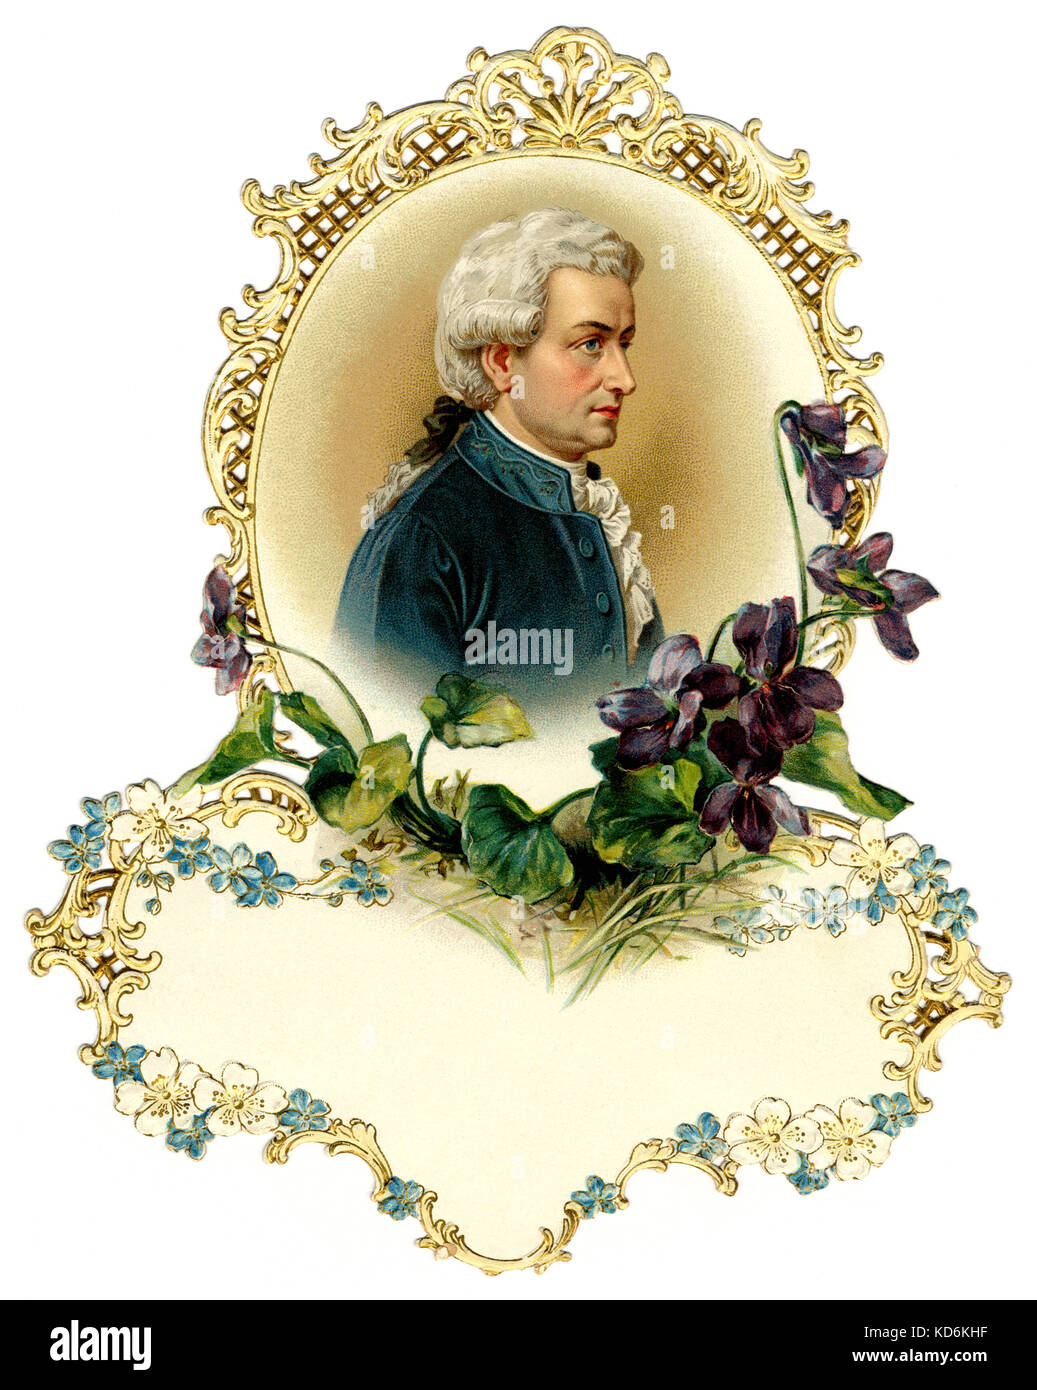 Wolfgan Amadeus Mozart - portrait of  Austrian composer painted on thick card, late 19th century. Flower surround. 27 January 1756 - 5 December 1791. Stock Photo